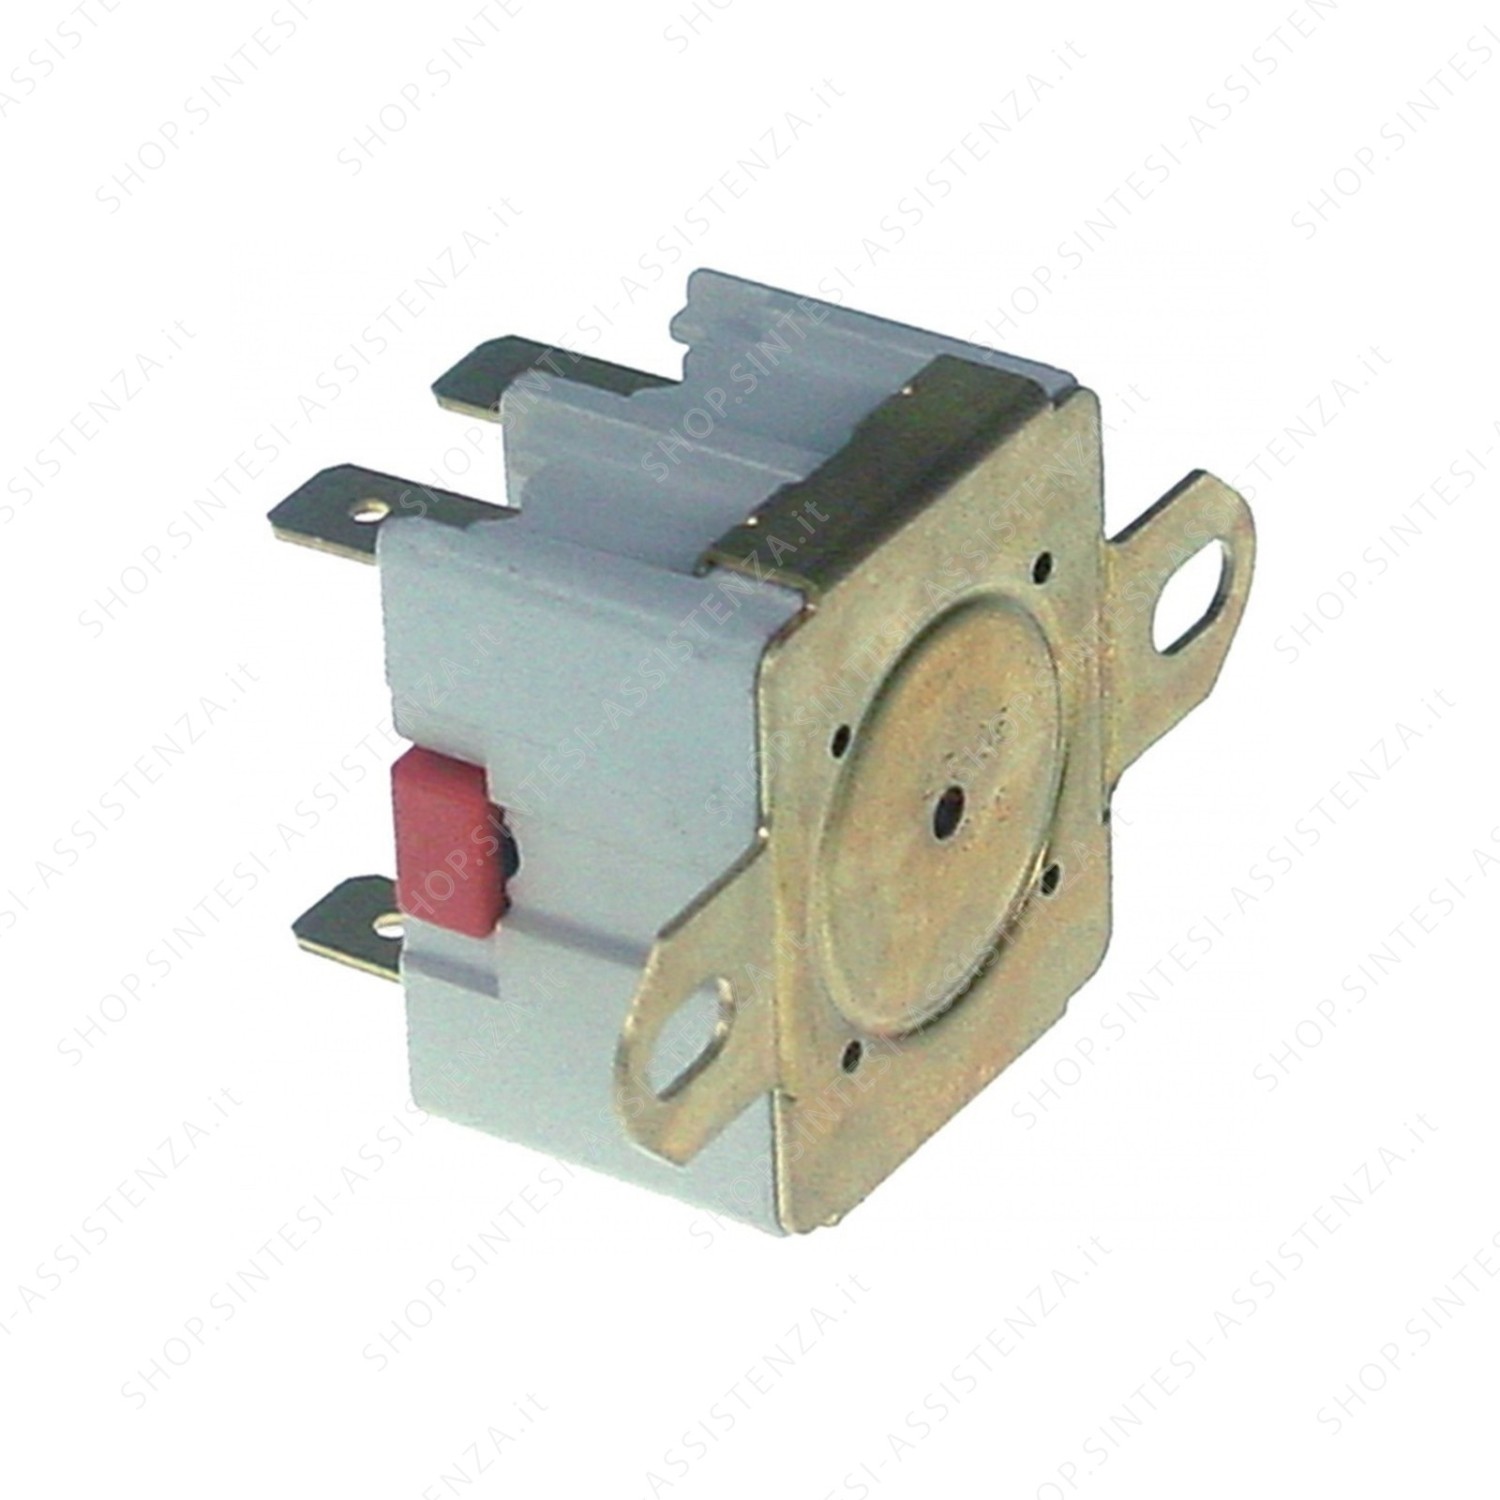 CONTACT SAFETY THERMOSTAT FOR ALFA 41 SMEG - 818730541